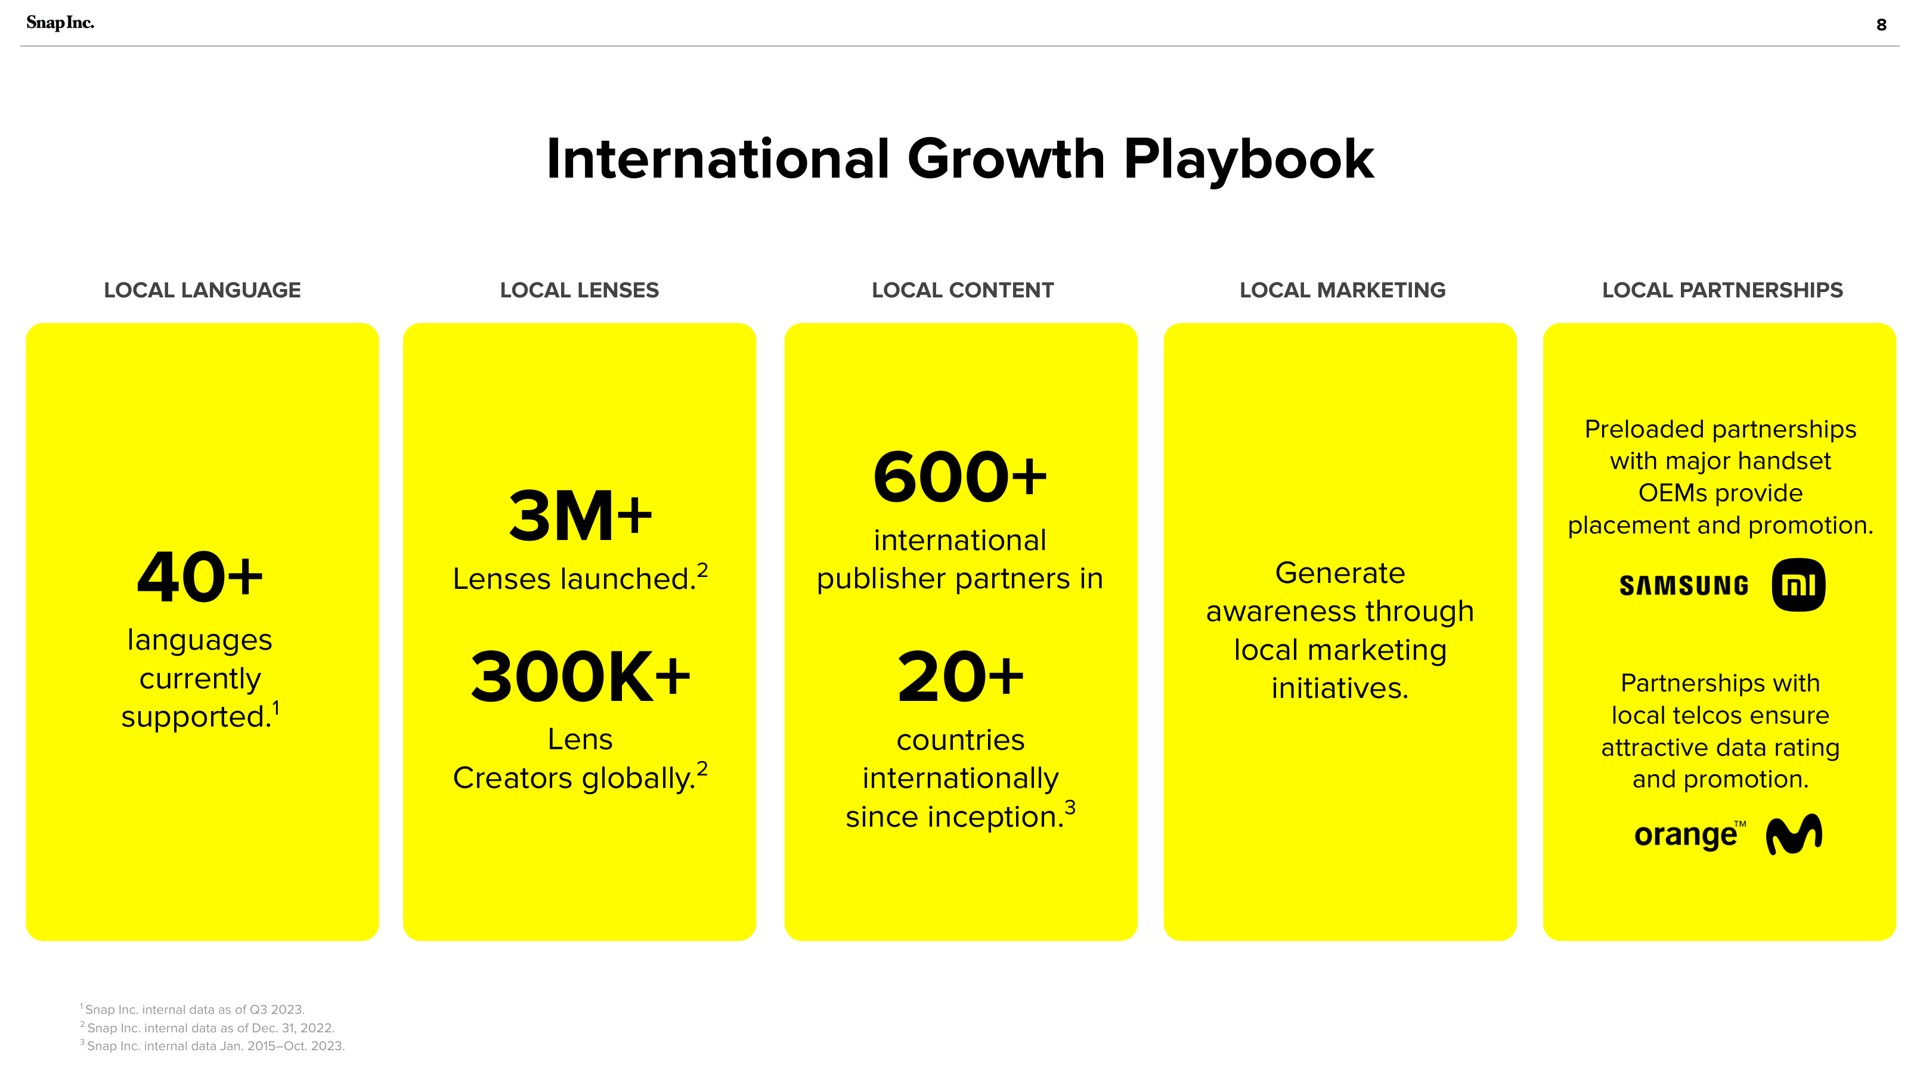 international growth playbook supported lenses launched creators globally since inception orange a | Snap Inc